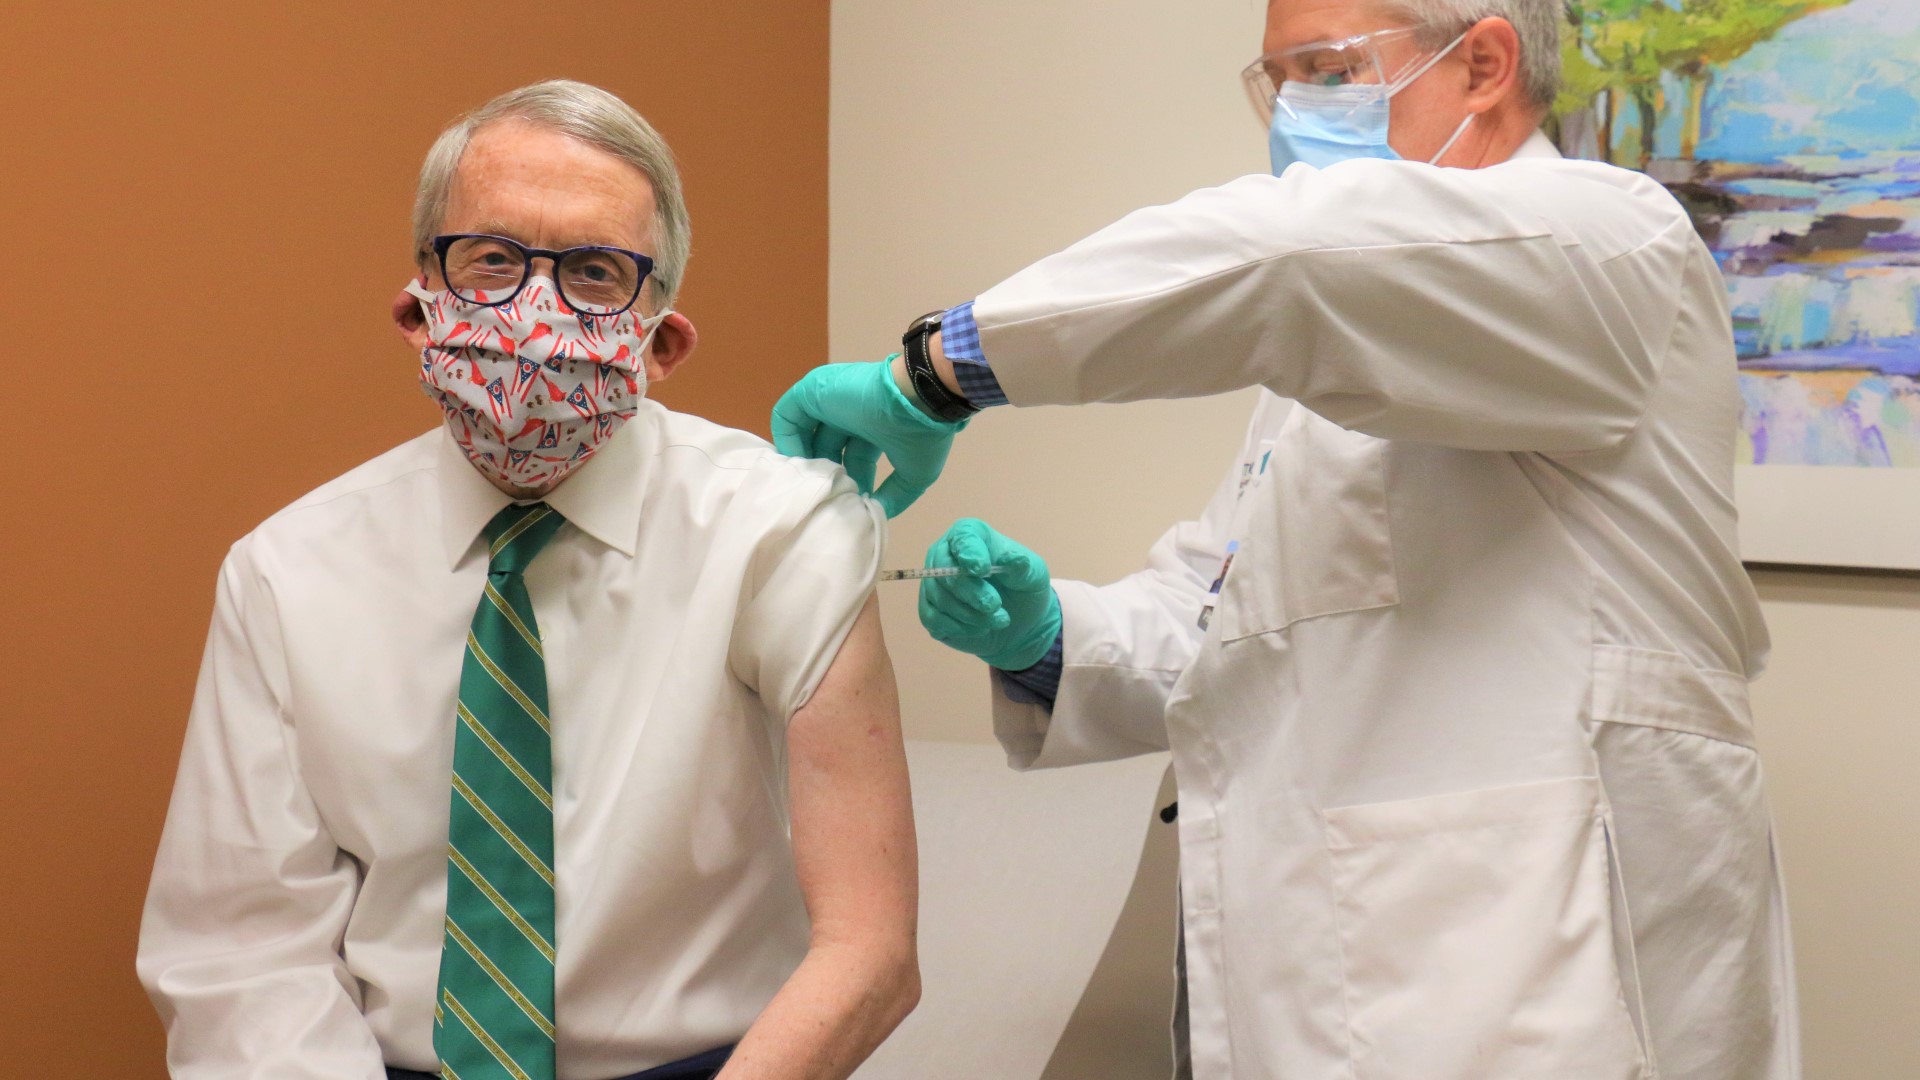 Ohio Governor Mike DeWine and First Lady Fran DeWine receive their second doses of the COVID-19 vaccine. VIdeo provided by the Governor's Office.